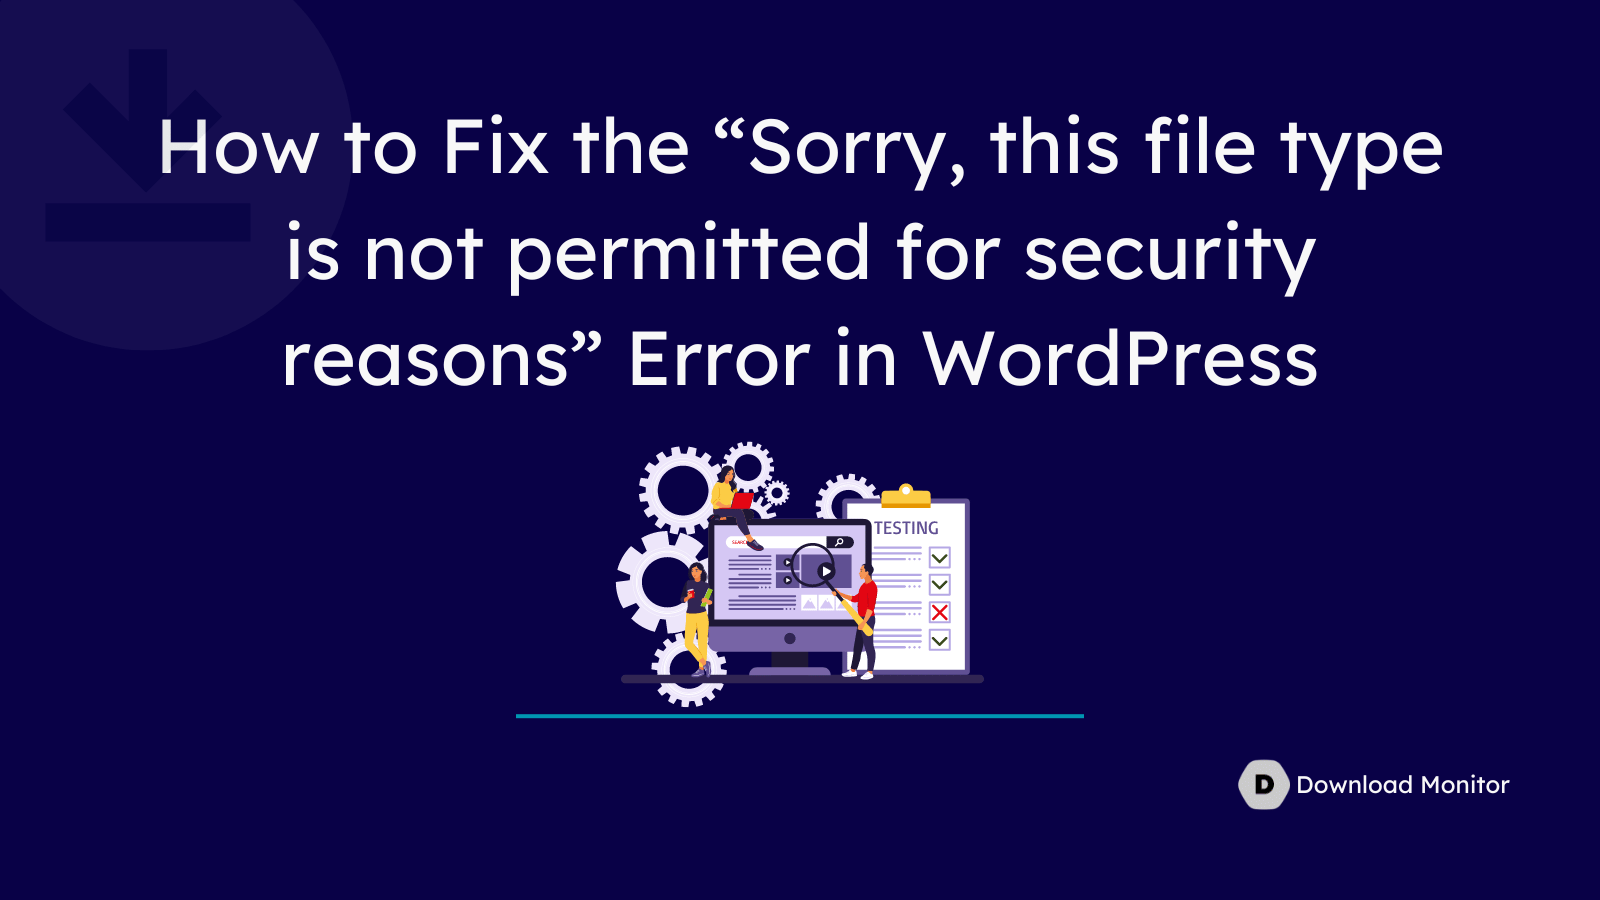 How to Fix the “Sorry, this file type is not permitted for security reasons” Error in WordPress